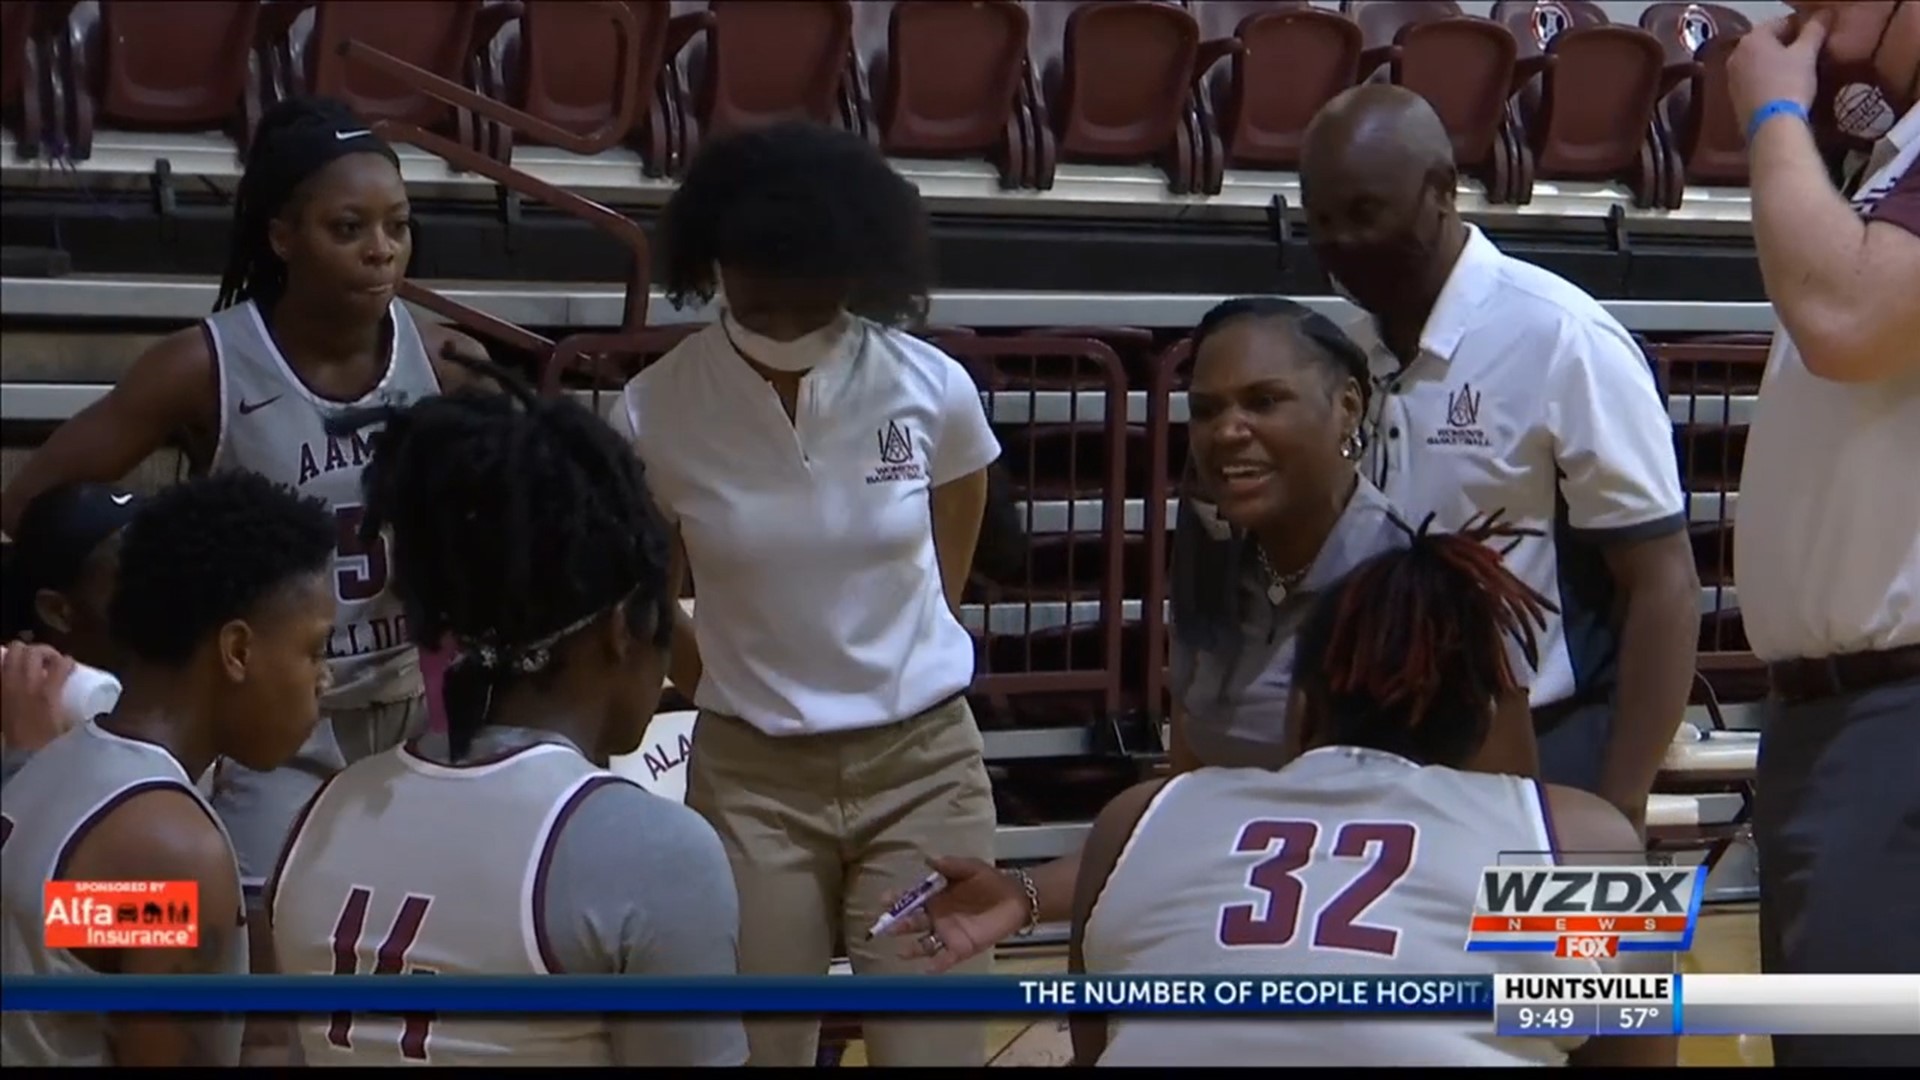 Margaret Richards & her Lady Bulldogs begin their SWAC Tourney run on Thursday when they face Grambling State